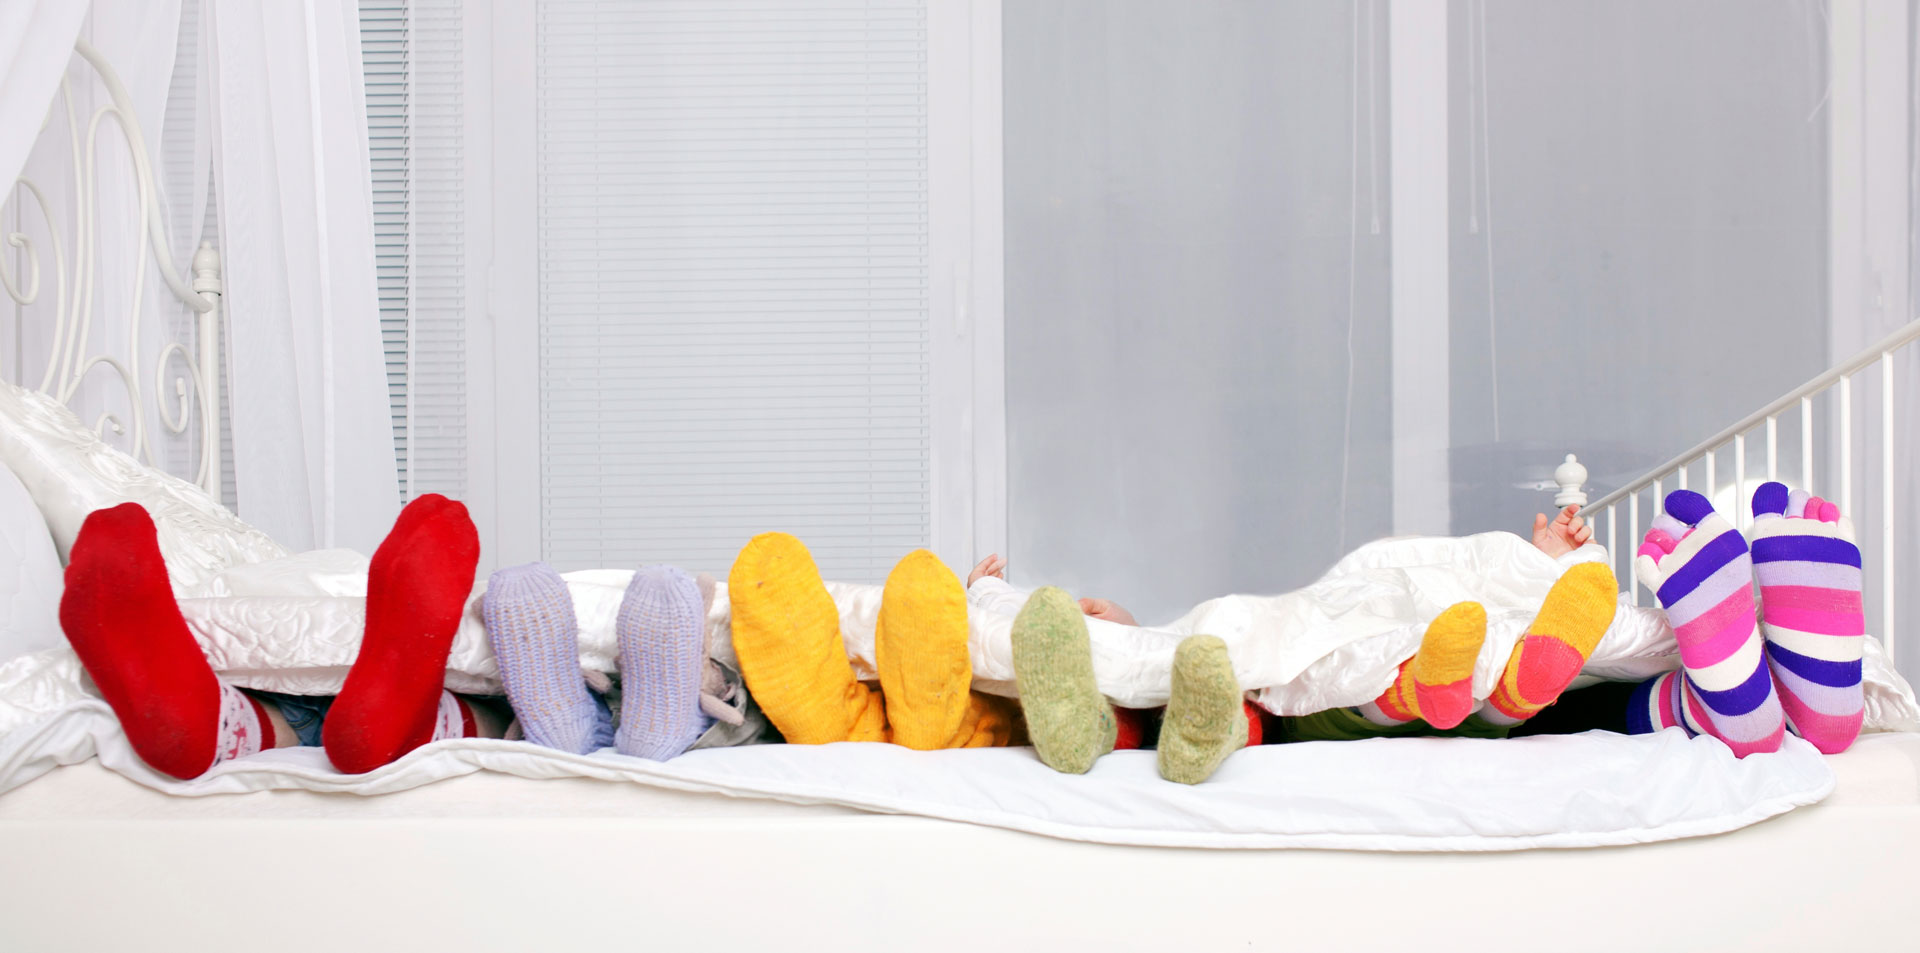 Feet of father, mother and four children in colorful knitted socks on white bed